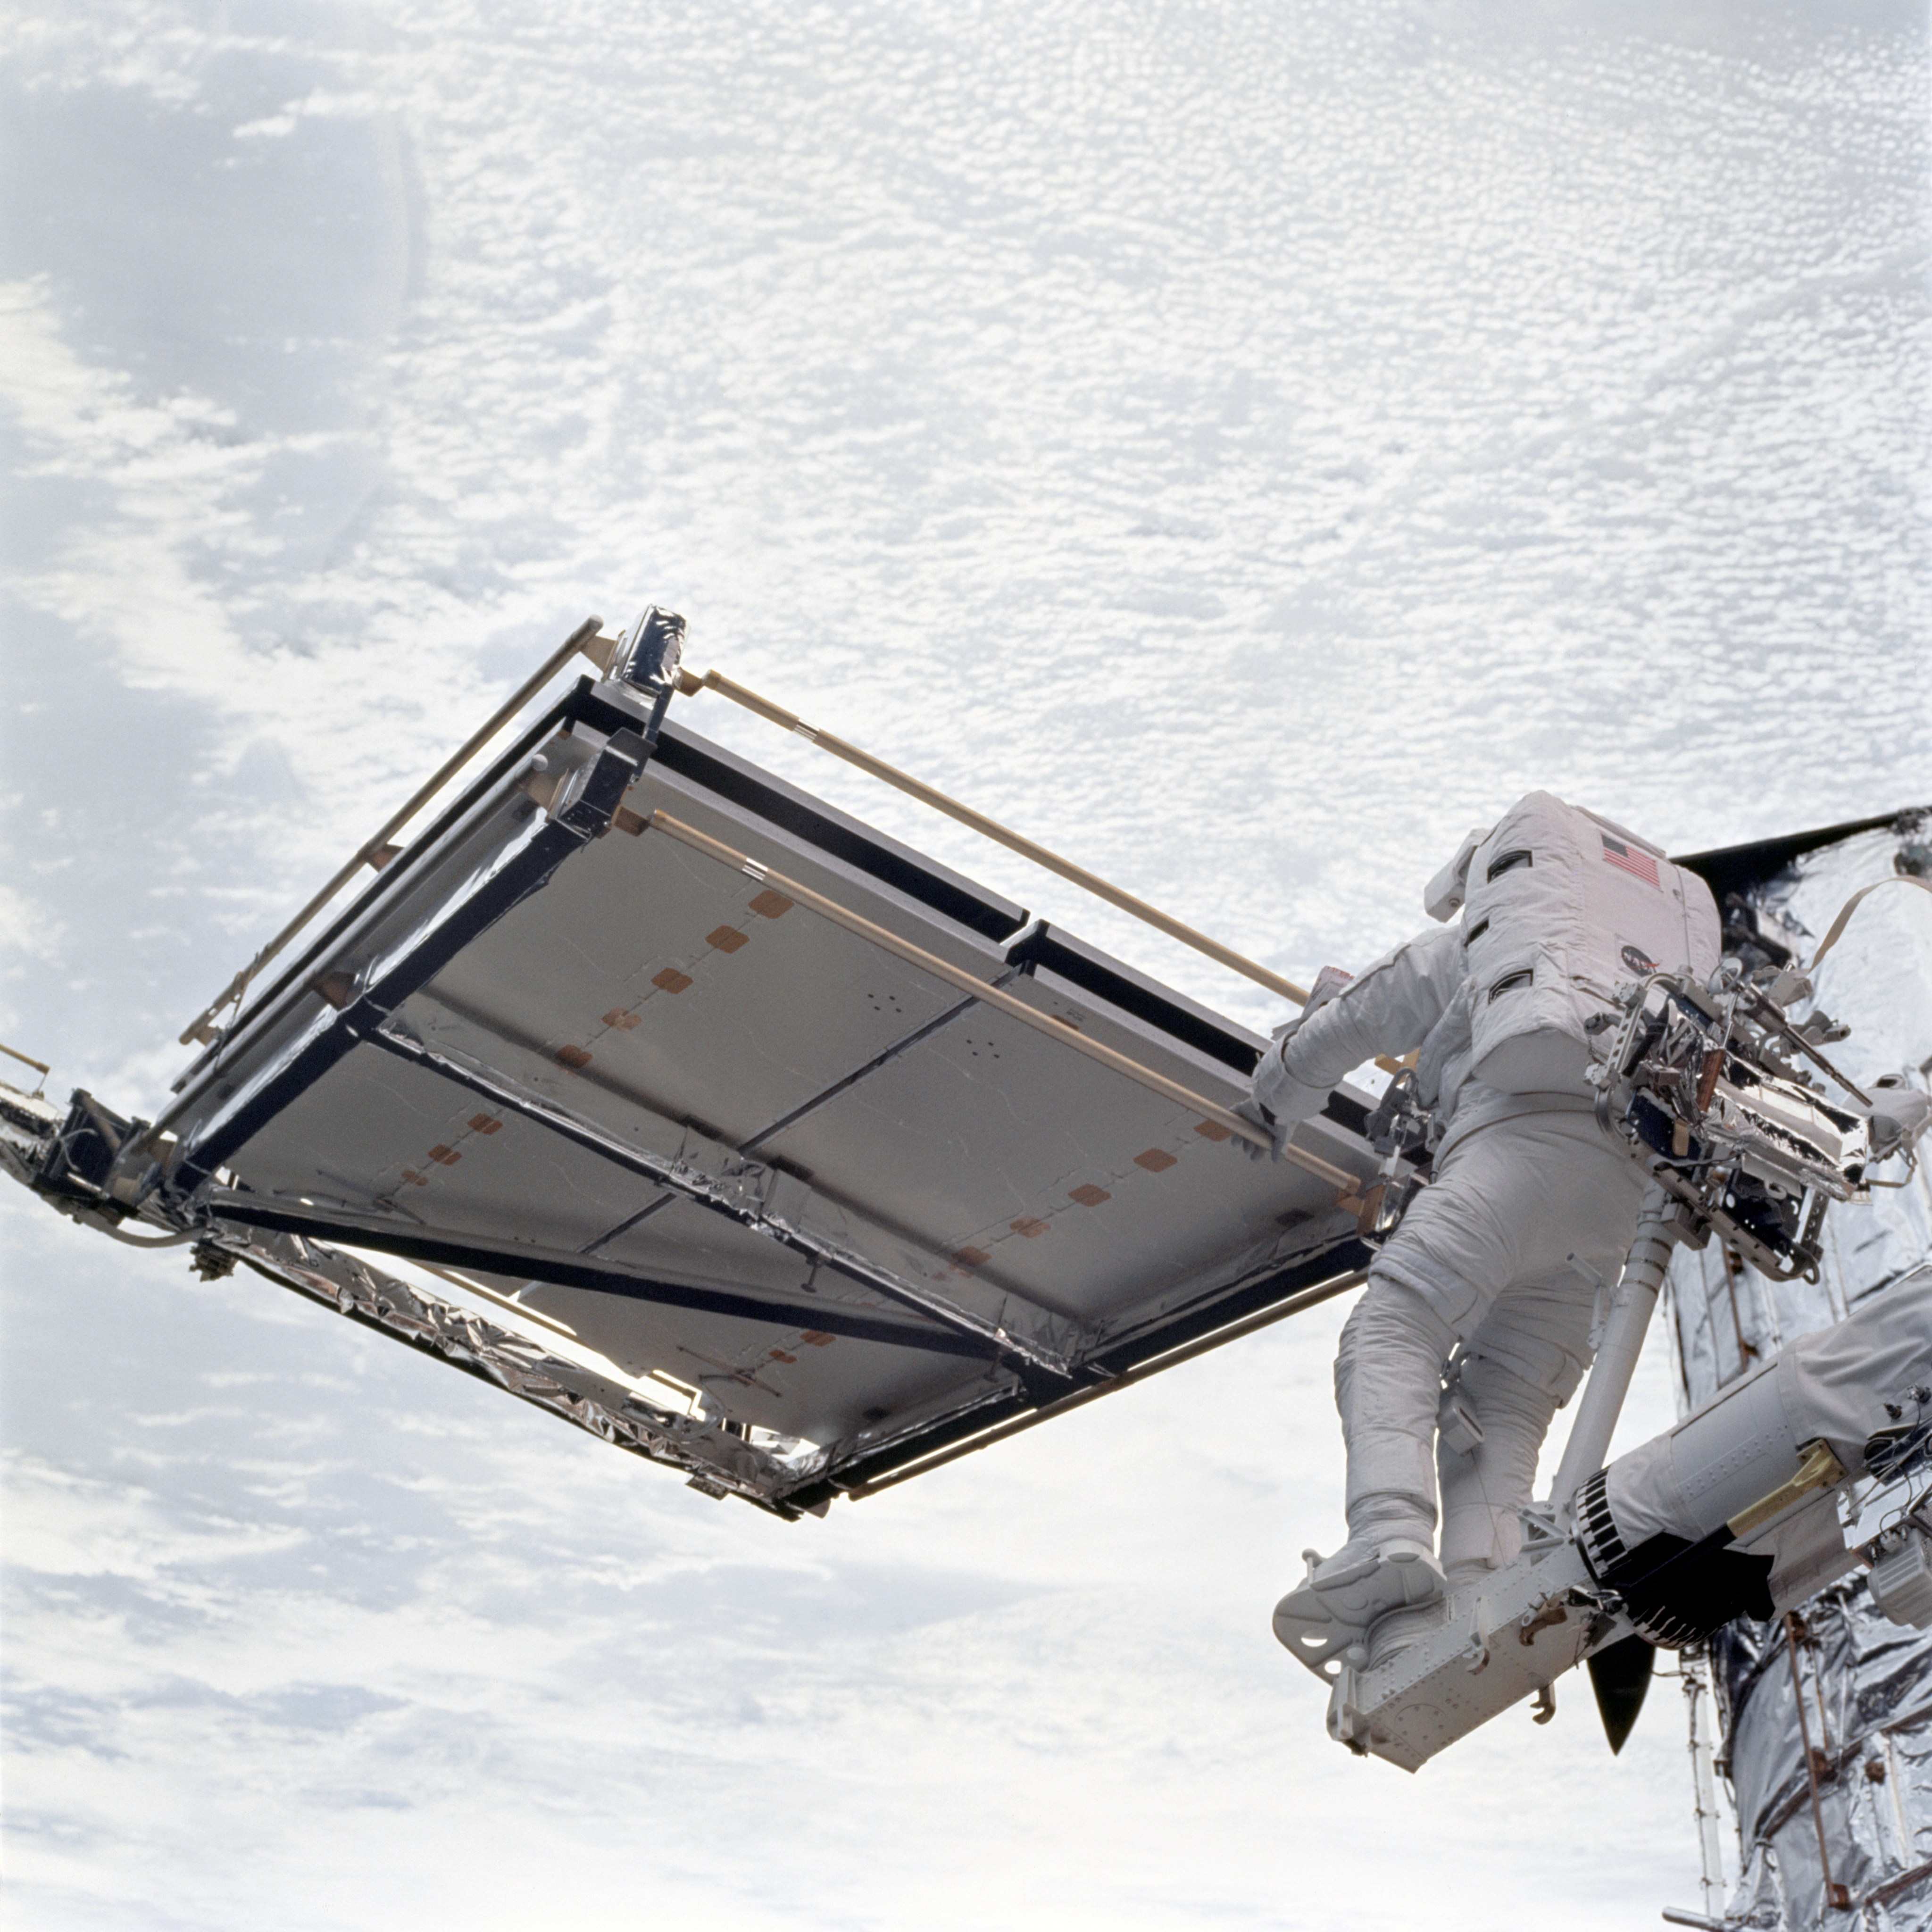 An astronaut works on a flat, square-shaped device (a folded solar array) against the white cloudy background of Earth.